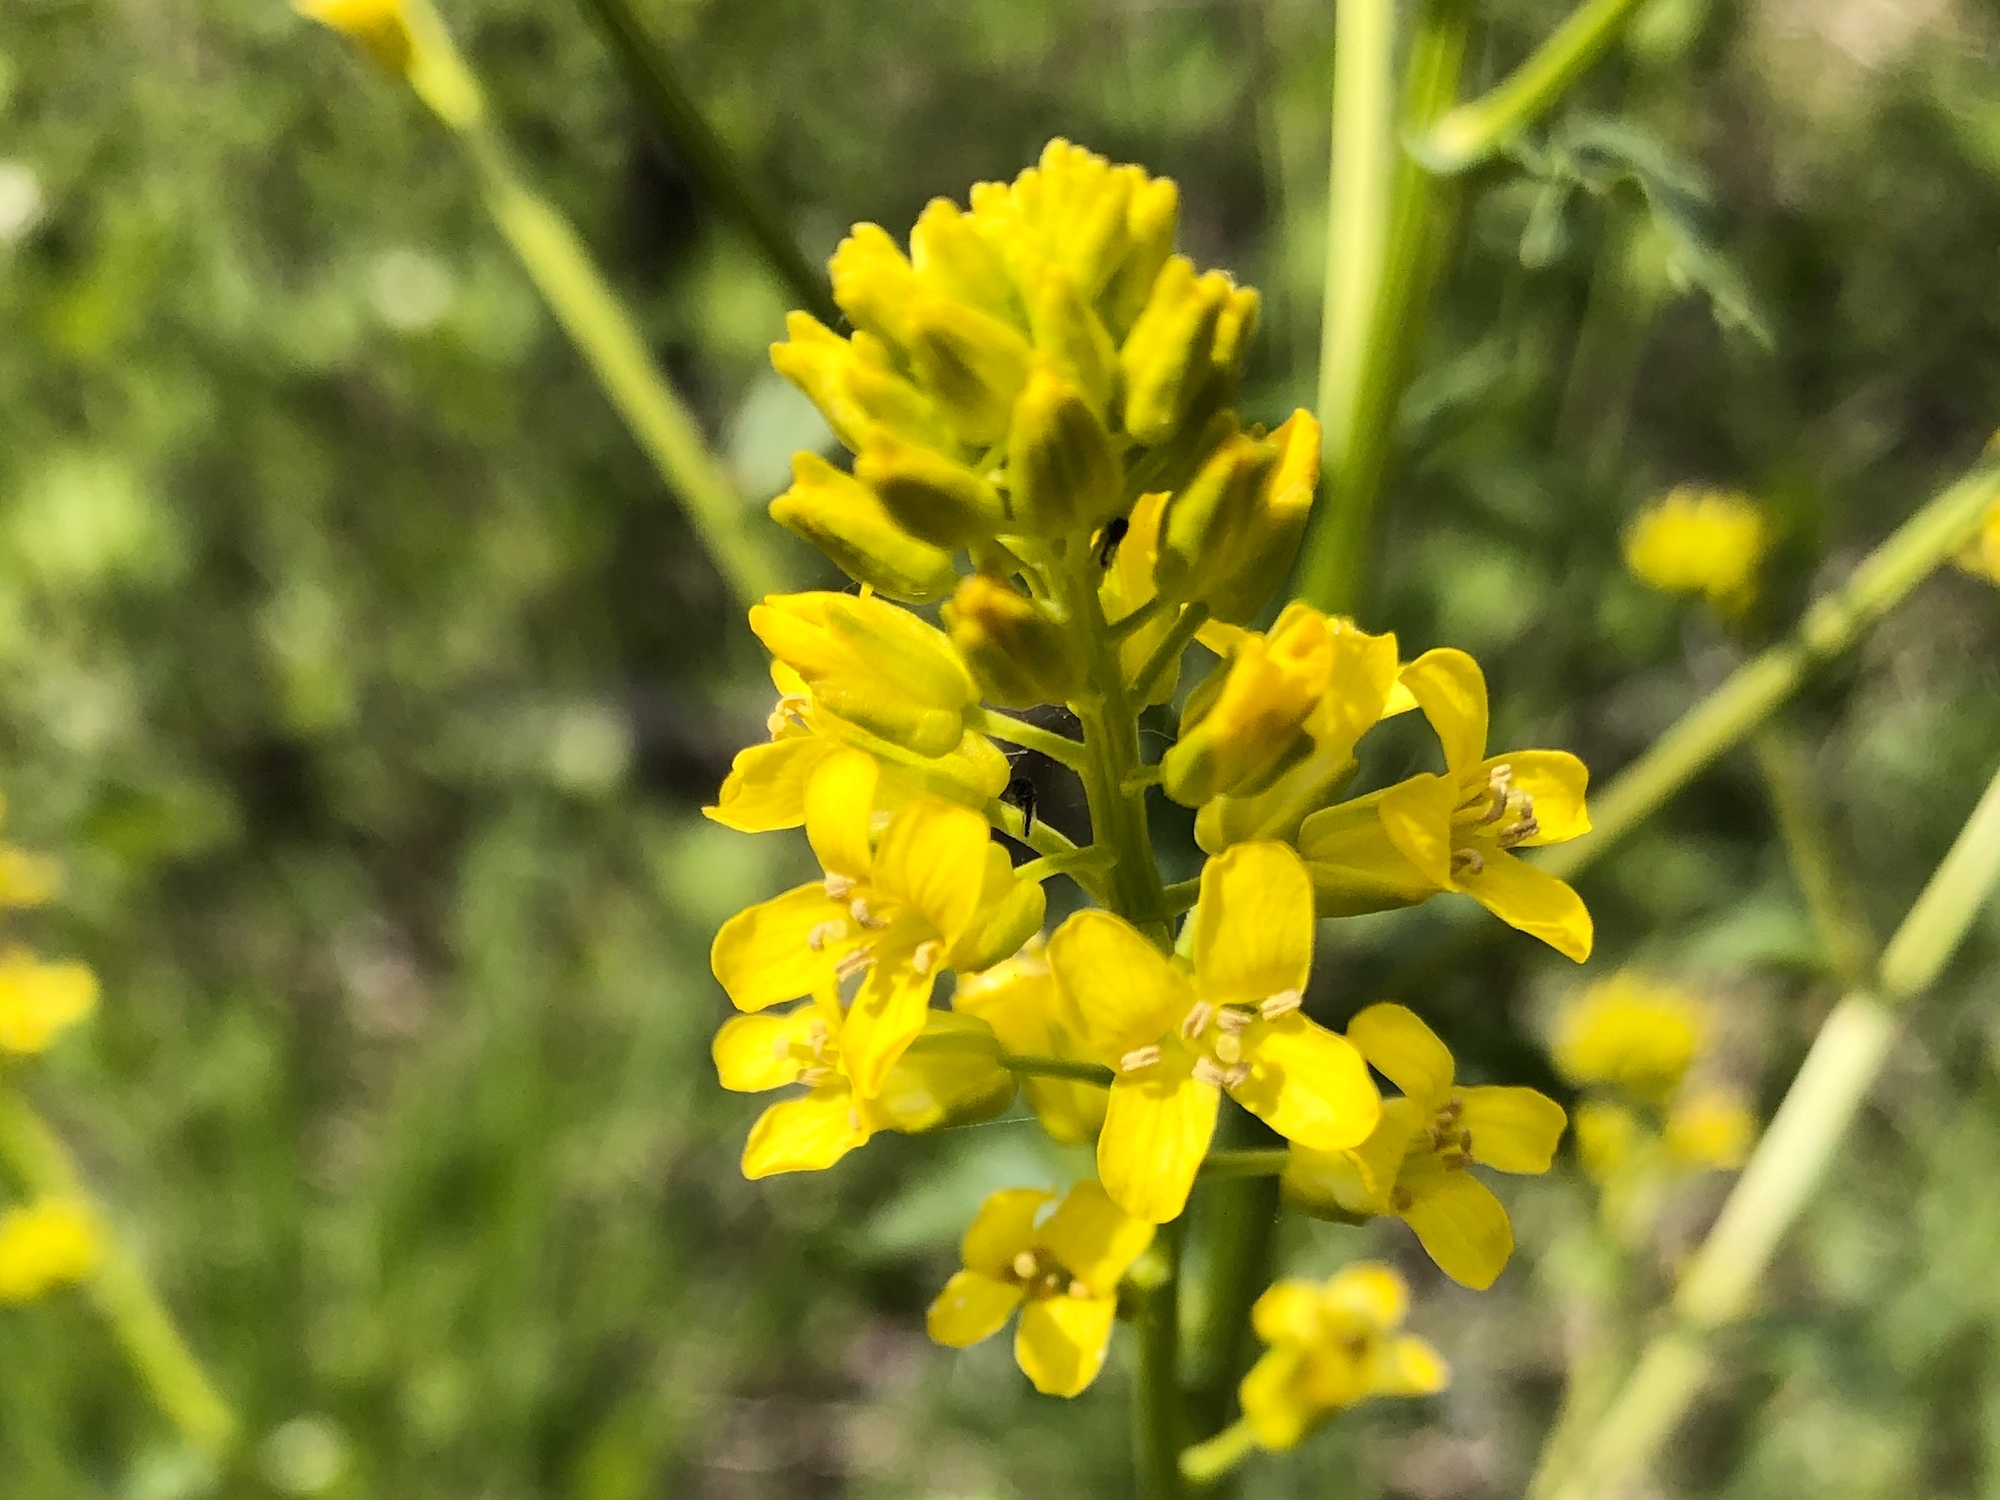 Garden Yellow Rocket in woods between Marion Dunn and Oak Savanna in Madison, Wisconsin on May 9, 2020.